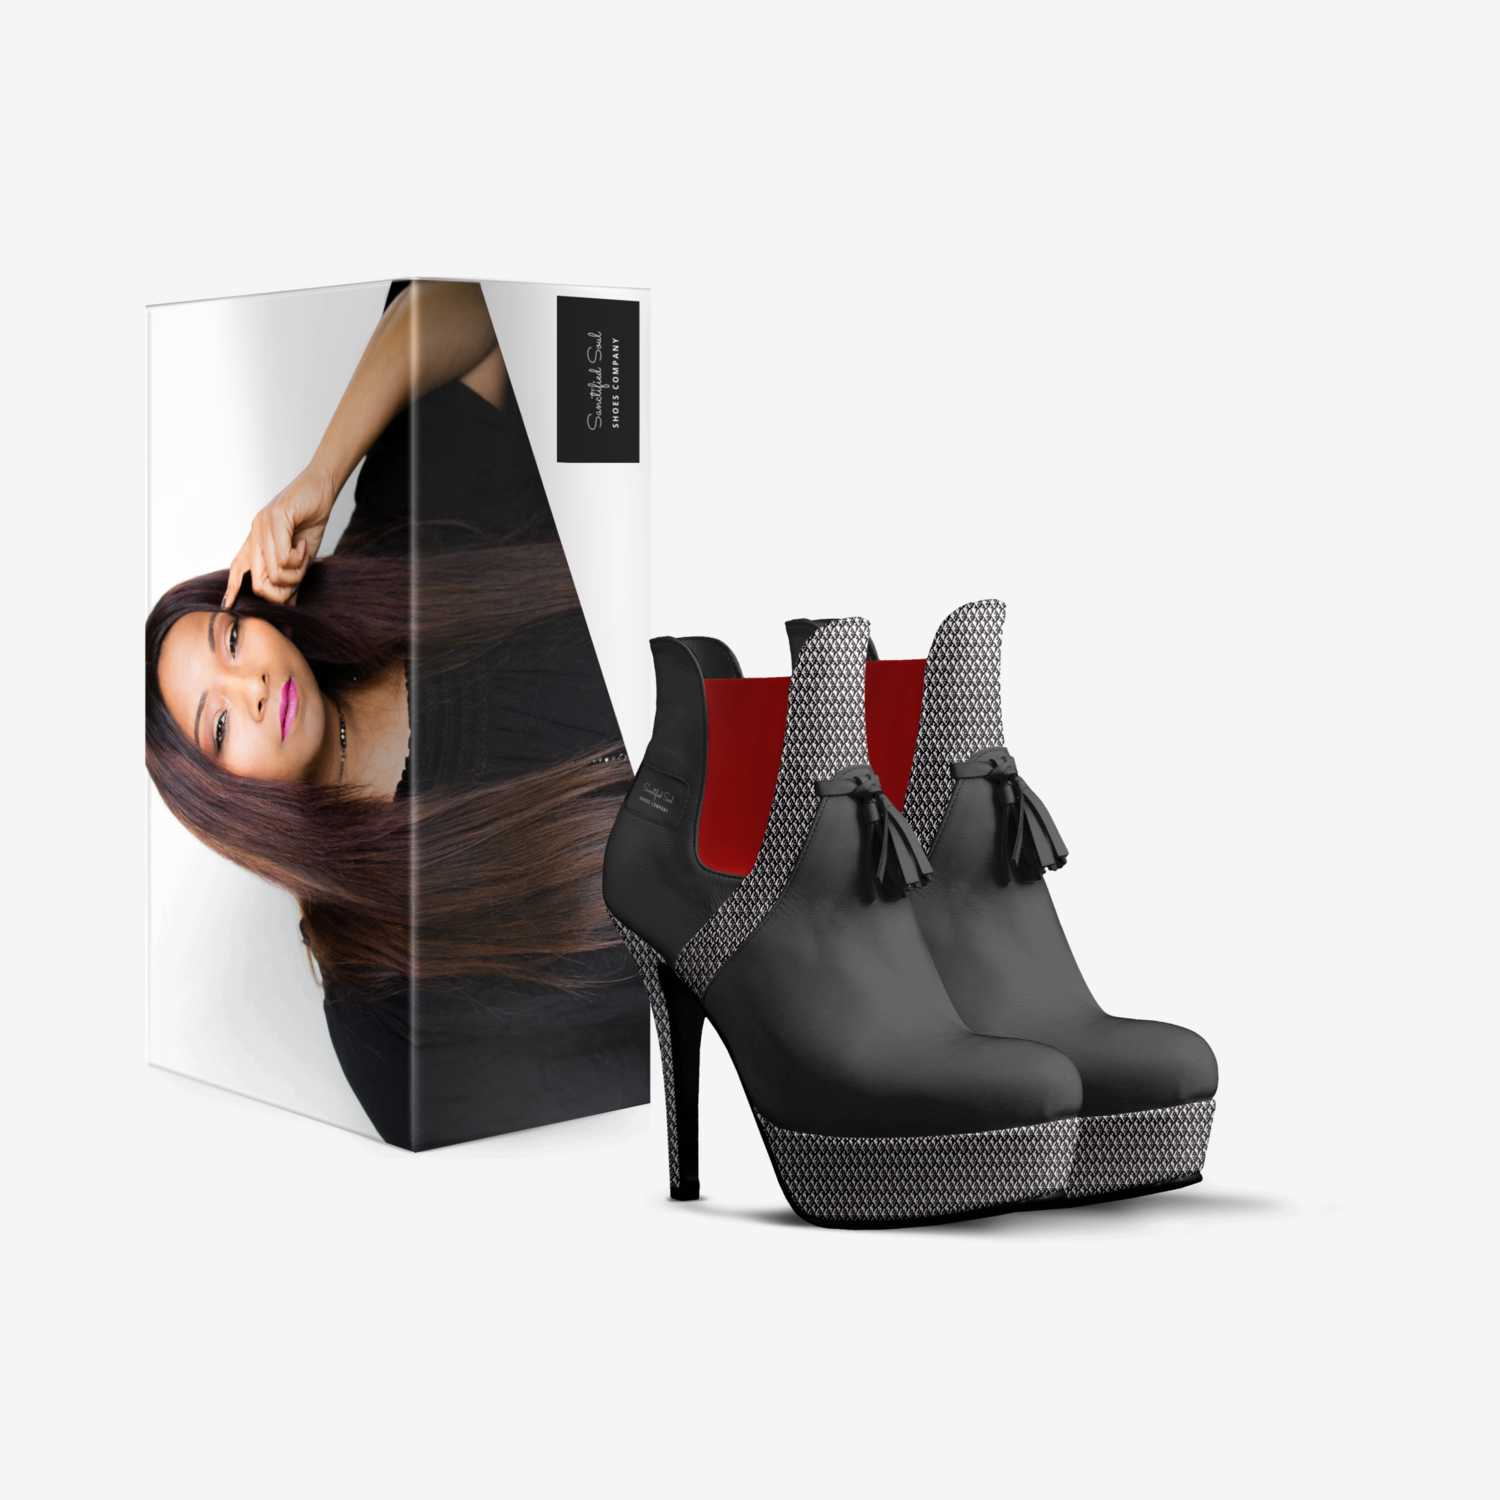 Sanctified Soul custom made in Italy shoes by Crystal Odom | Box view